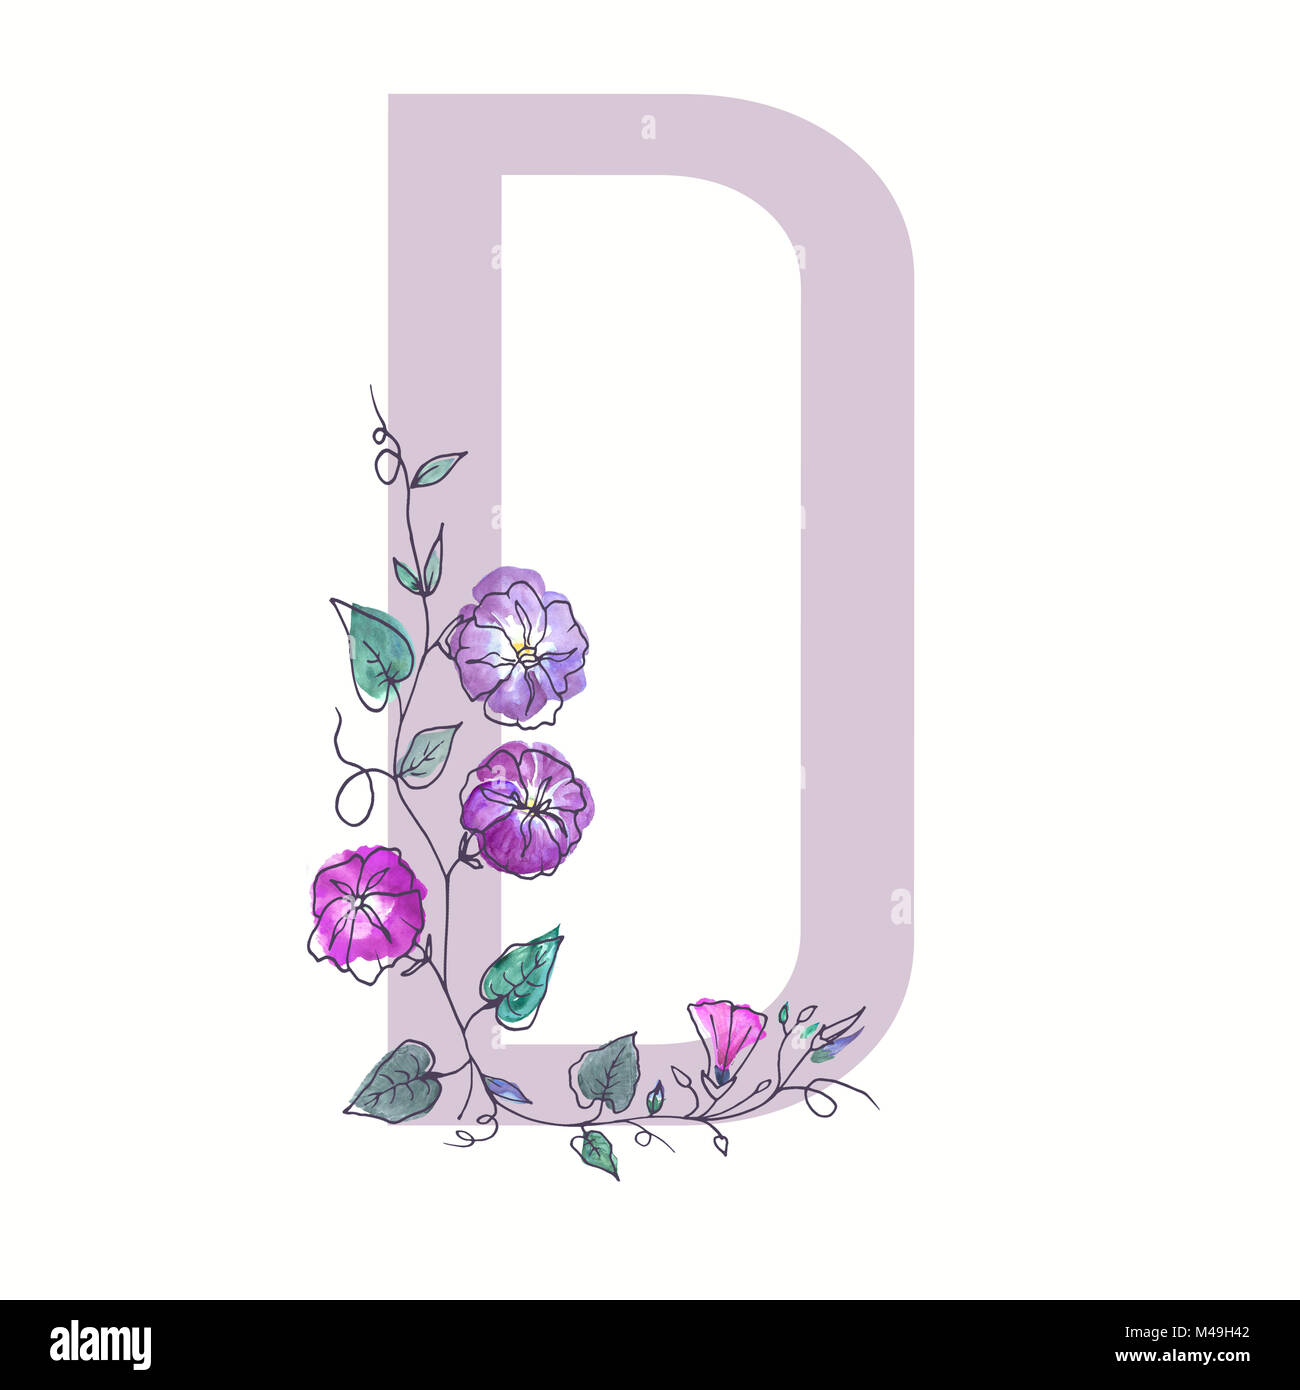 The capital letter from the alphabet is decorated with curly flowers. Watercolor illustration of botanical plants. Isolated image of outlined flowers  Stock Photo